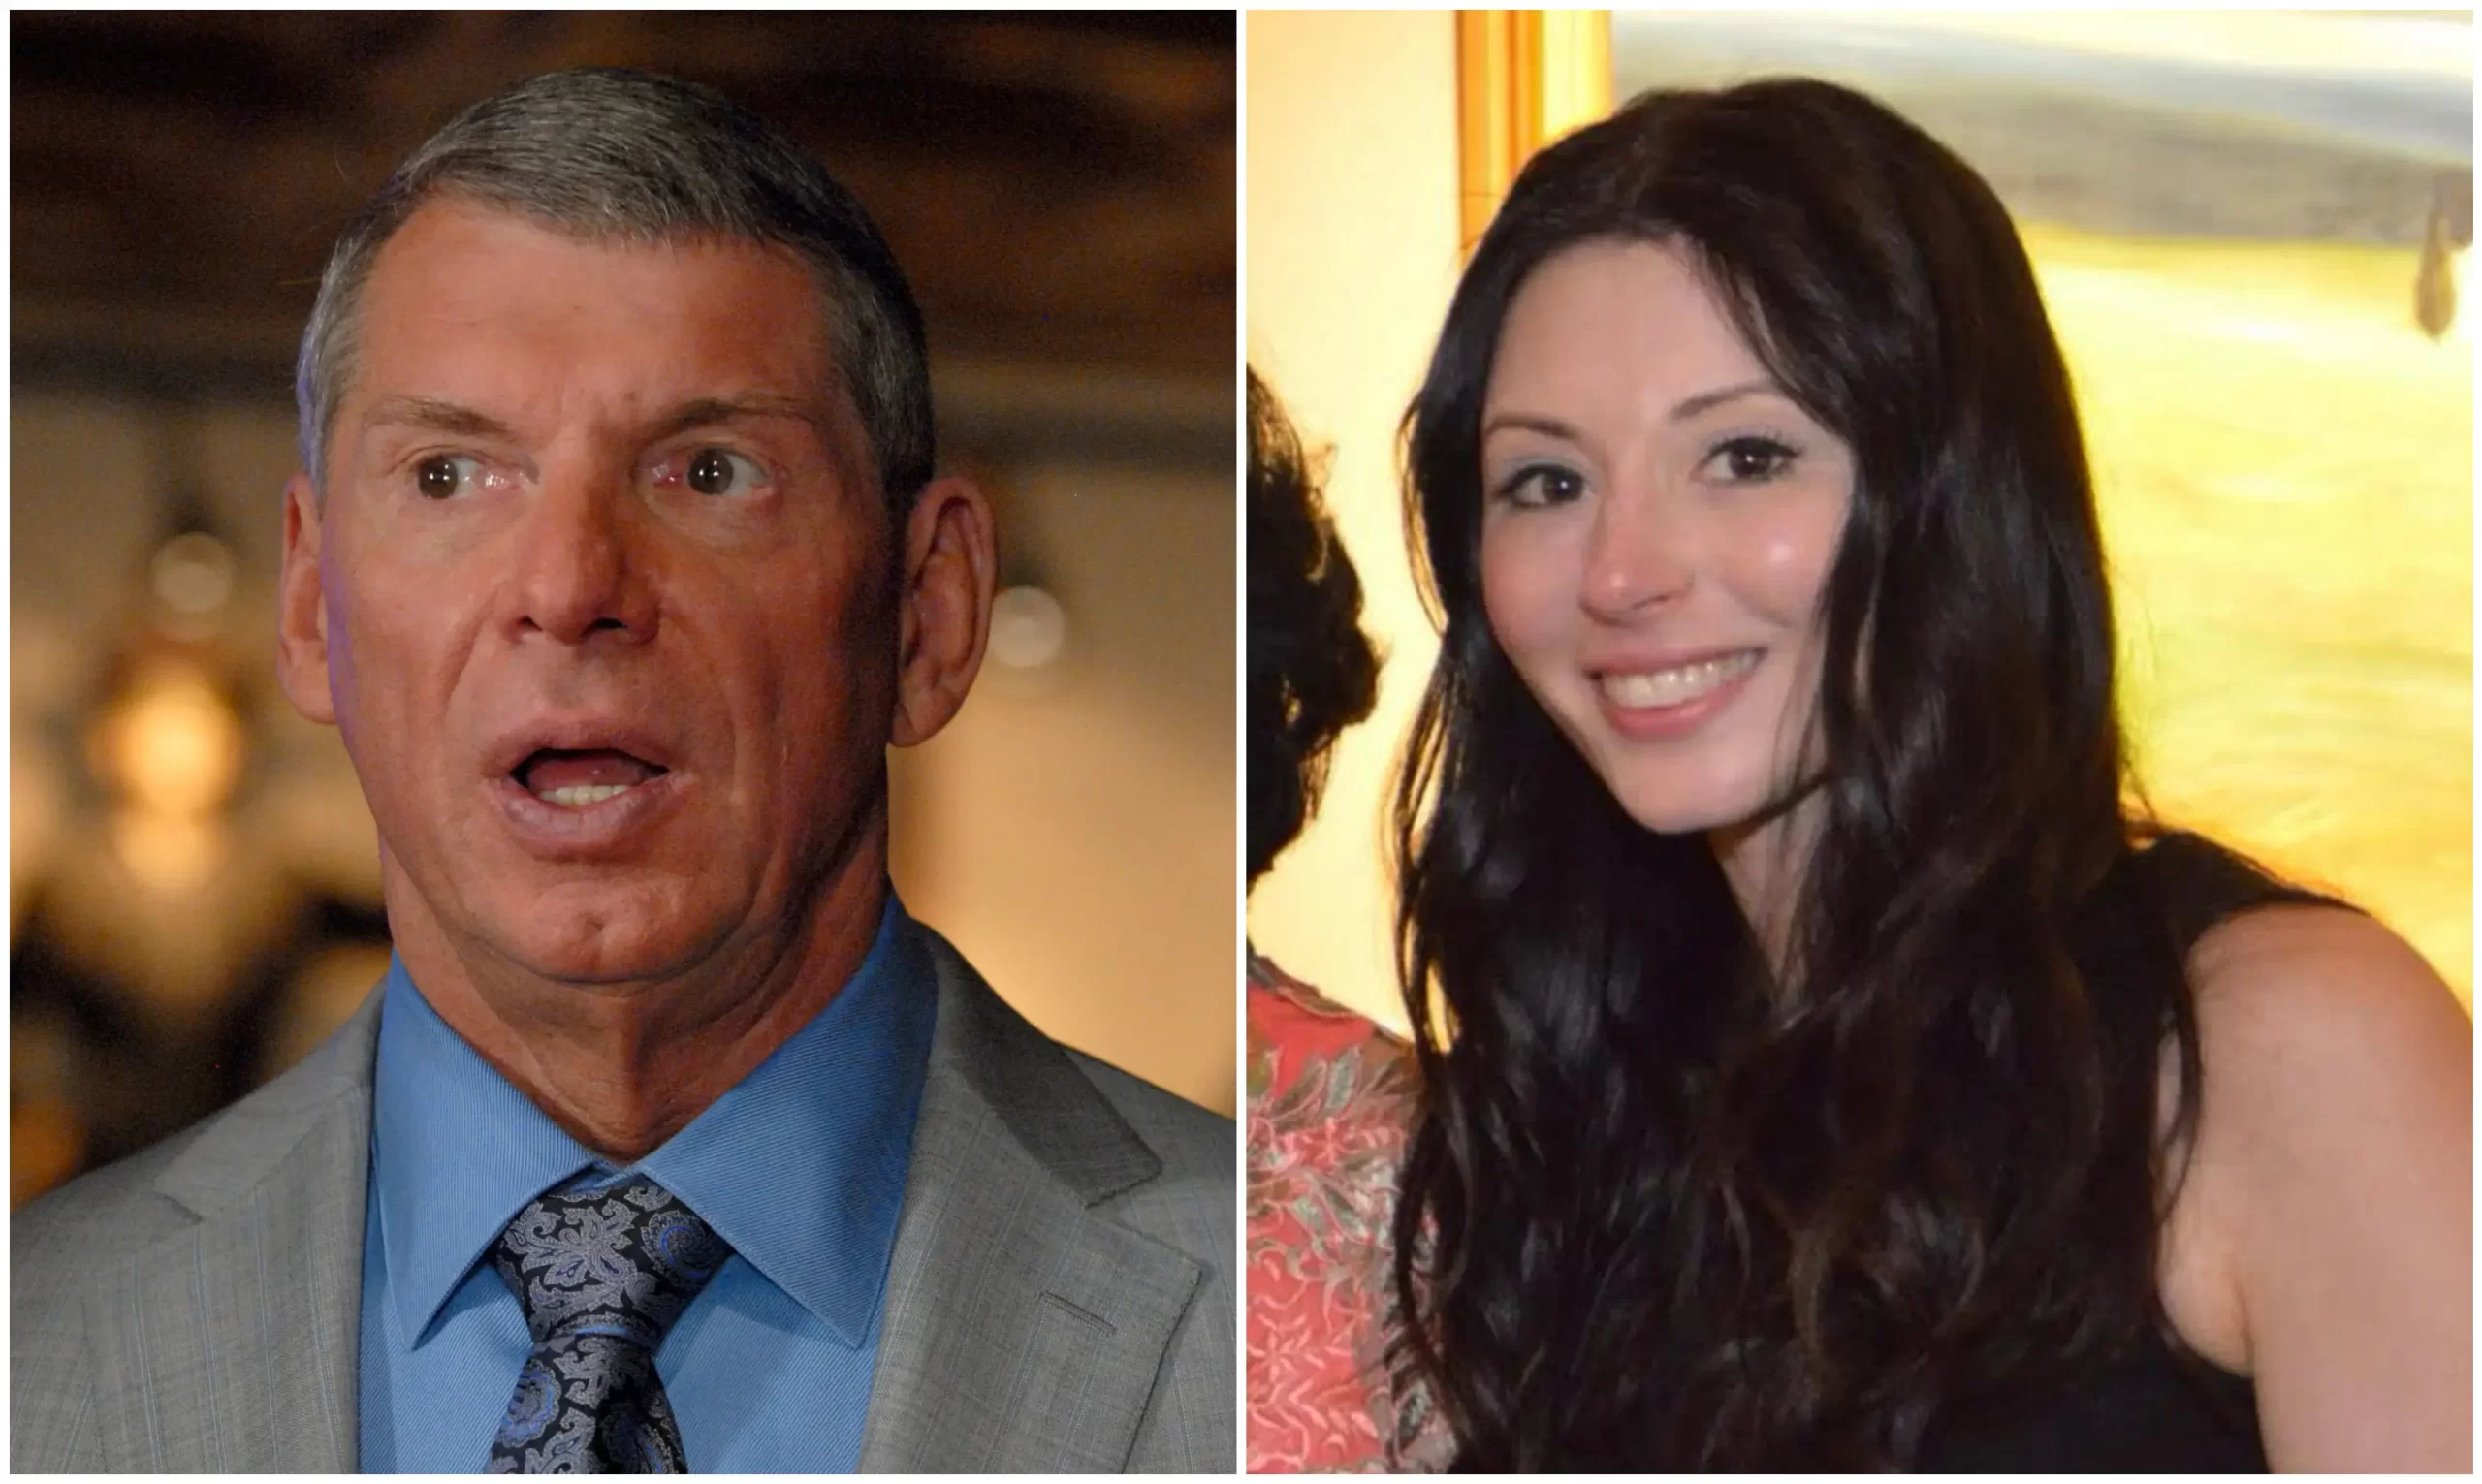 Janel Grant and Vince McMahon scaled